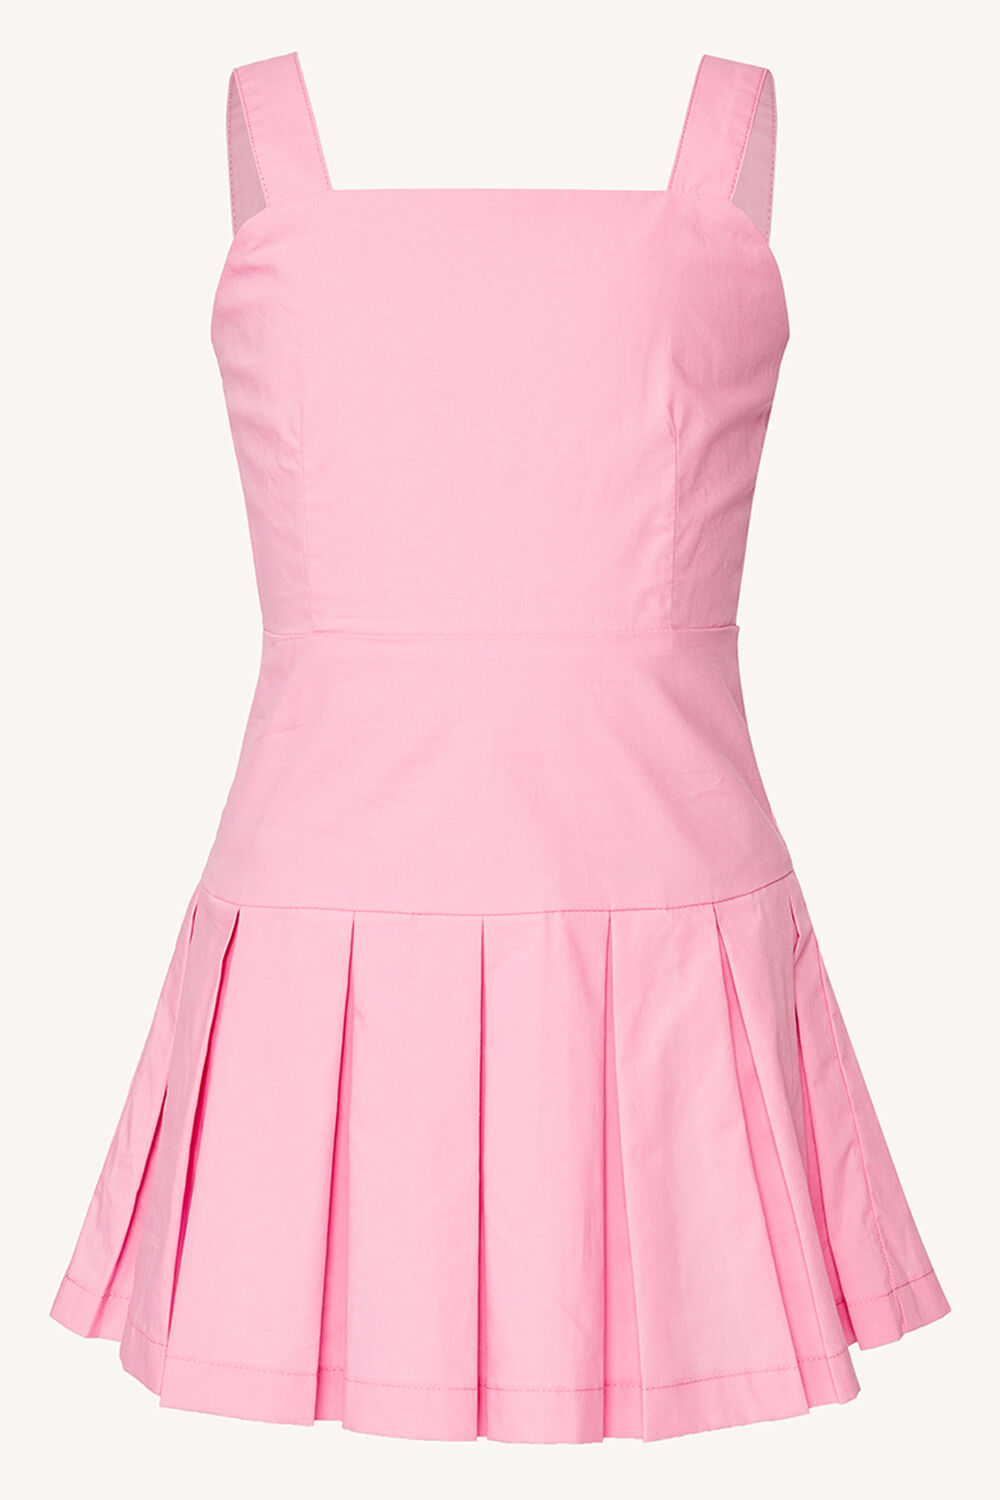 TILLY PLEAT DRESS in colour PINK LADY